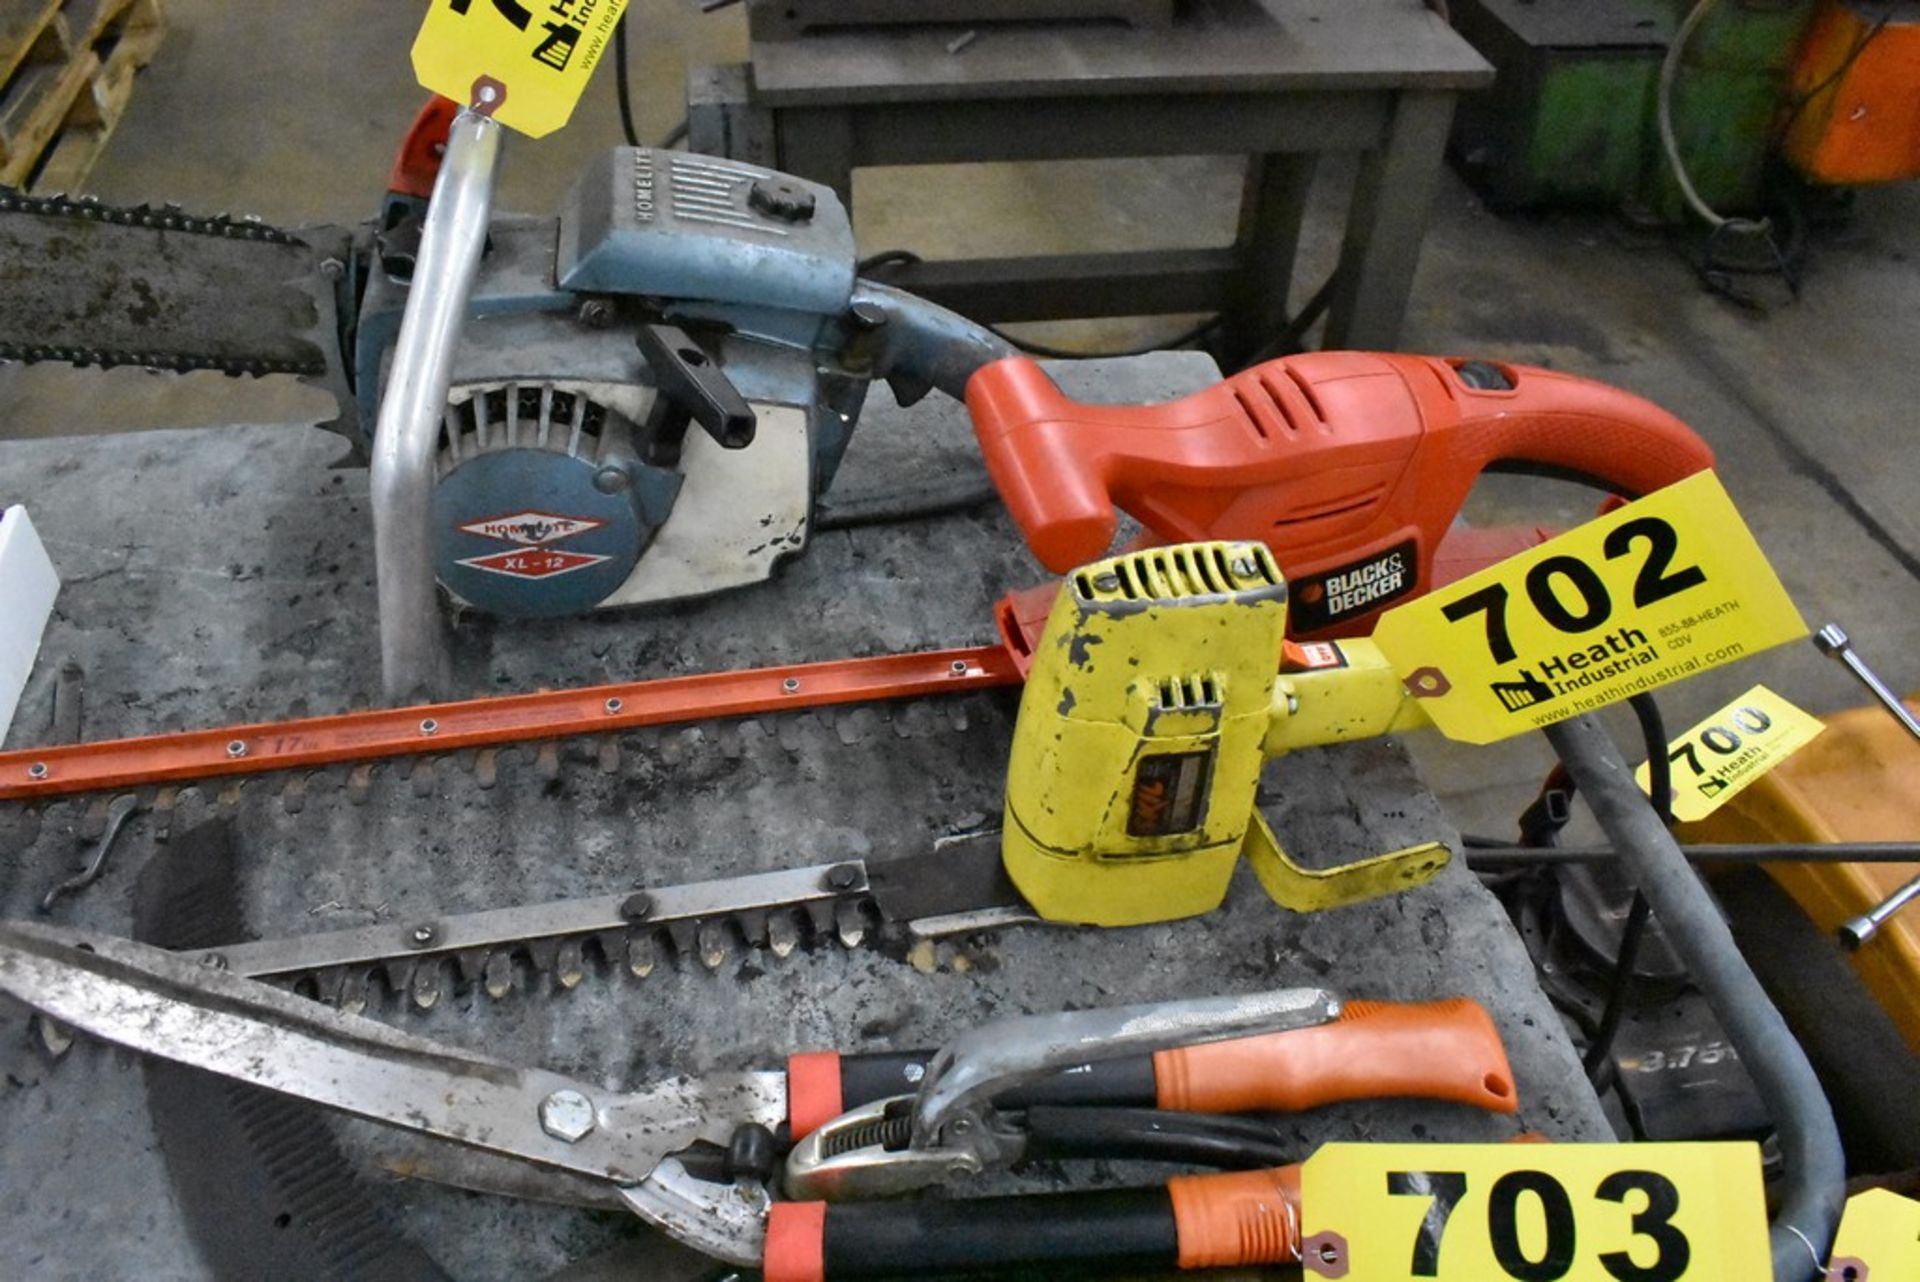 (2) ELECTRIC HEDGE TRIMMERS